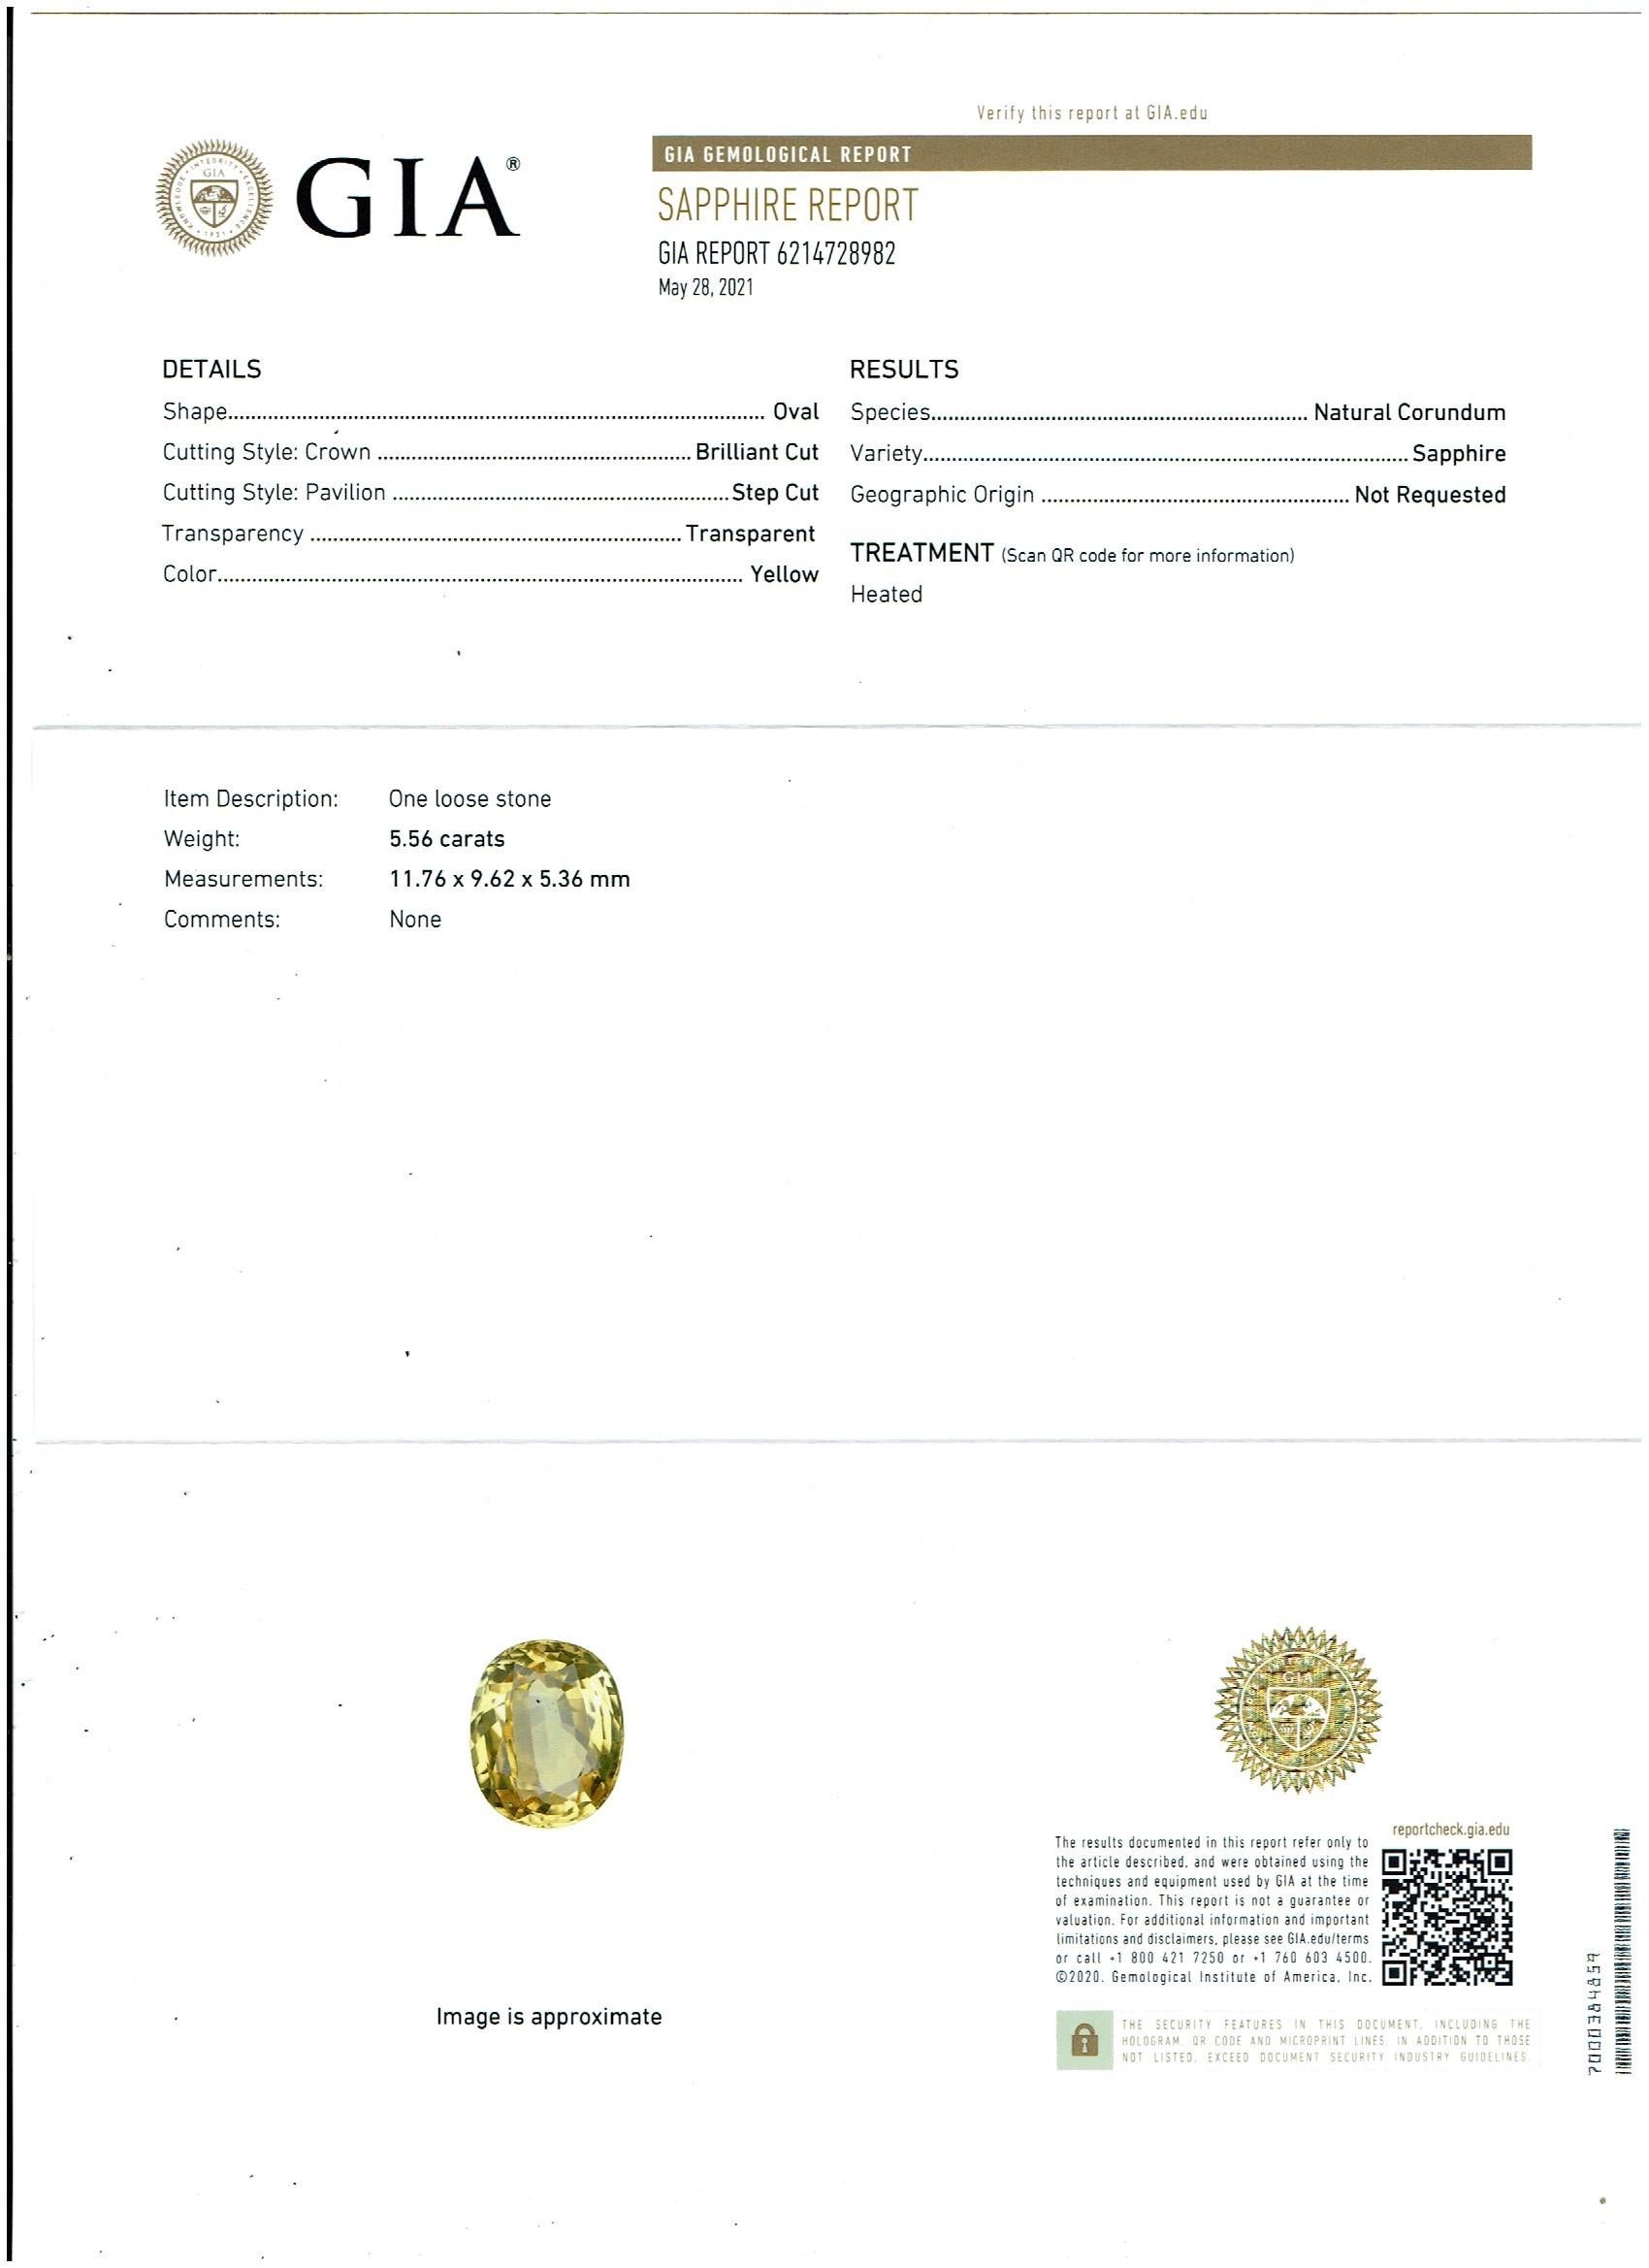 GIA Certified 5.56 Ct Natural Ceylon Yellow Sapphire Pendant Necklace white Gold For Sale 3